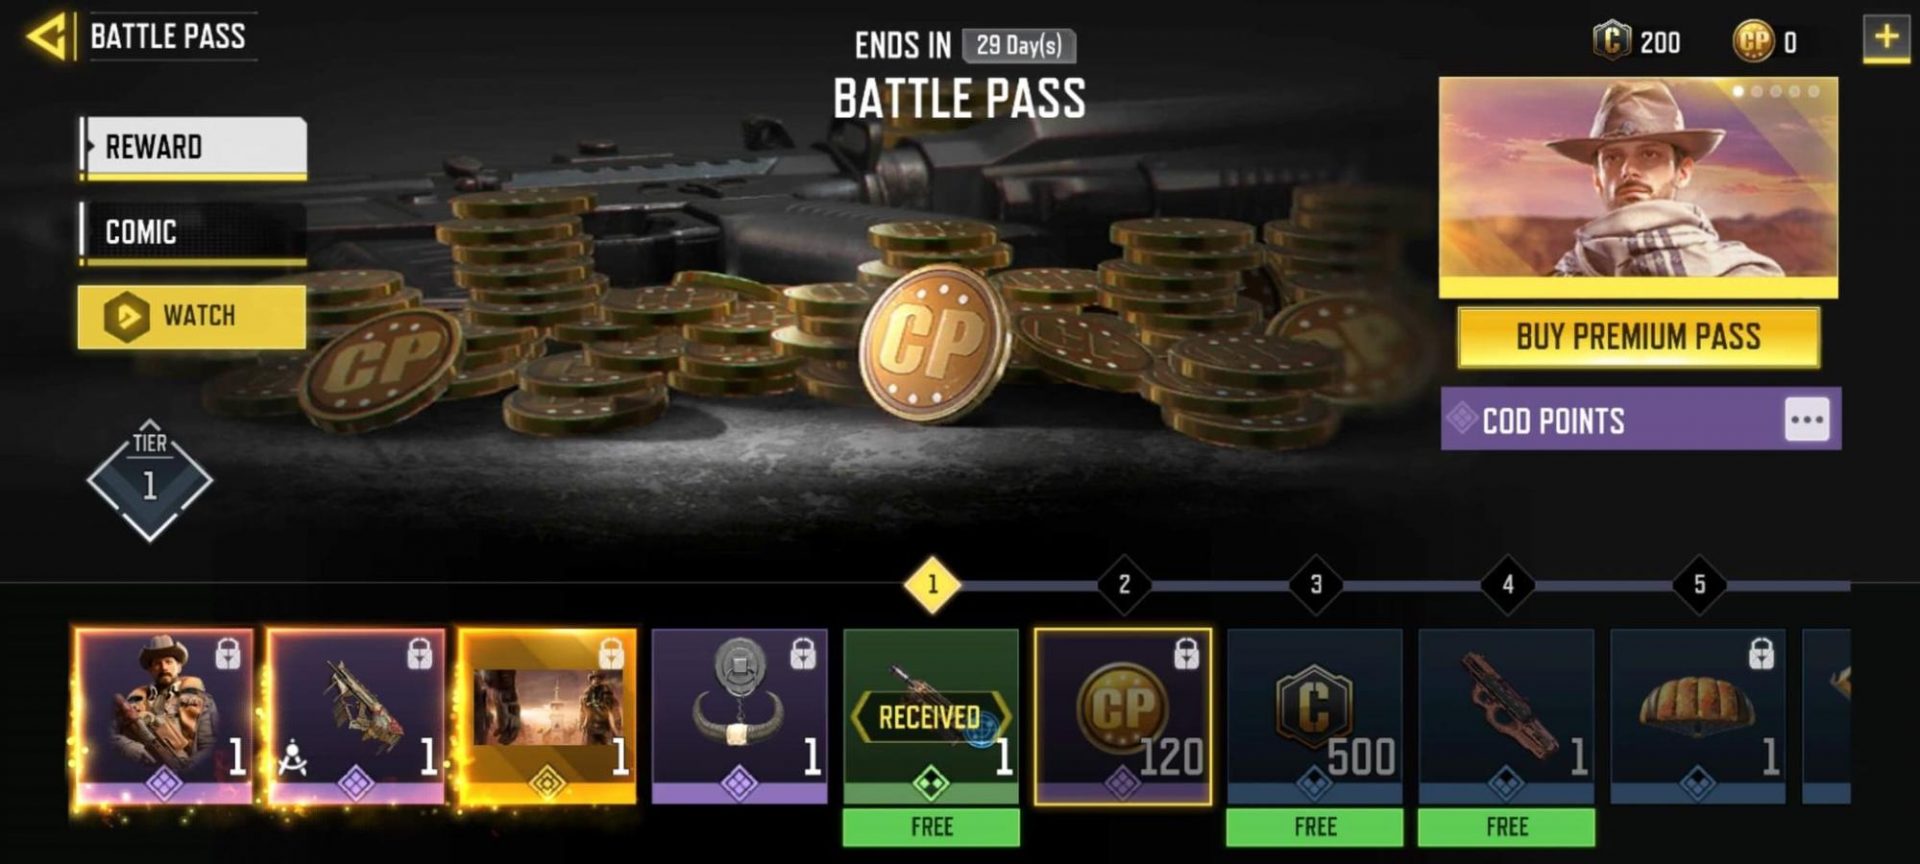 A Quick Guide On Call Of Duty Mobile Battle Pass And How It Works